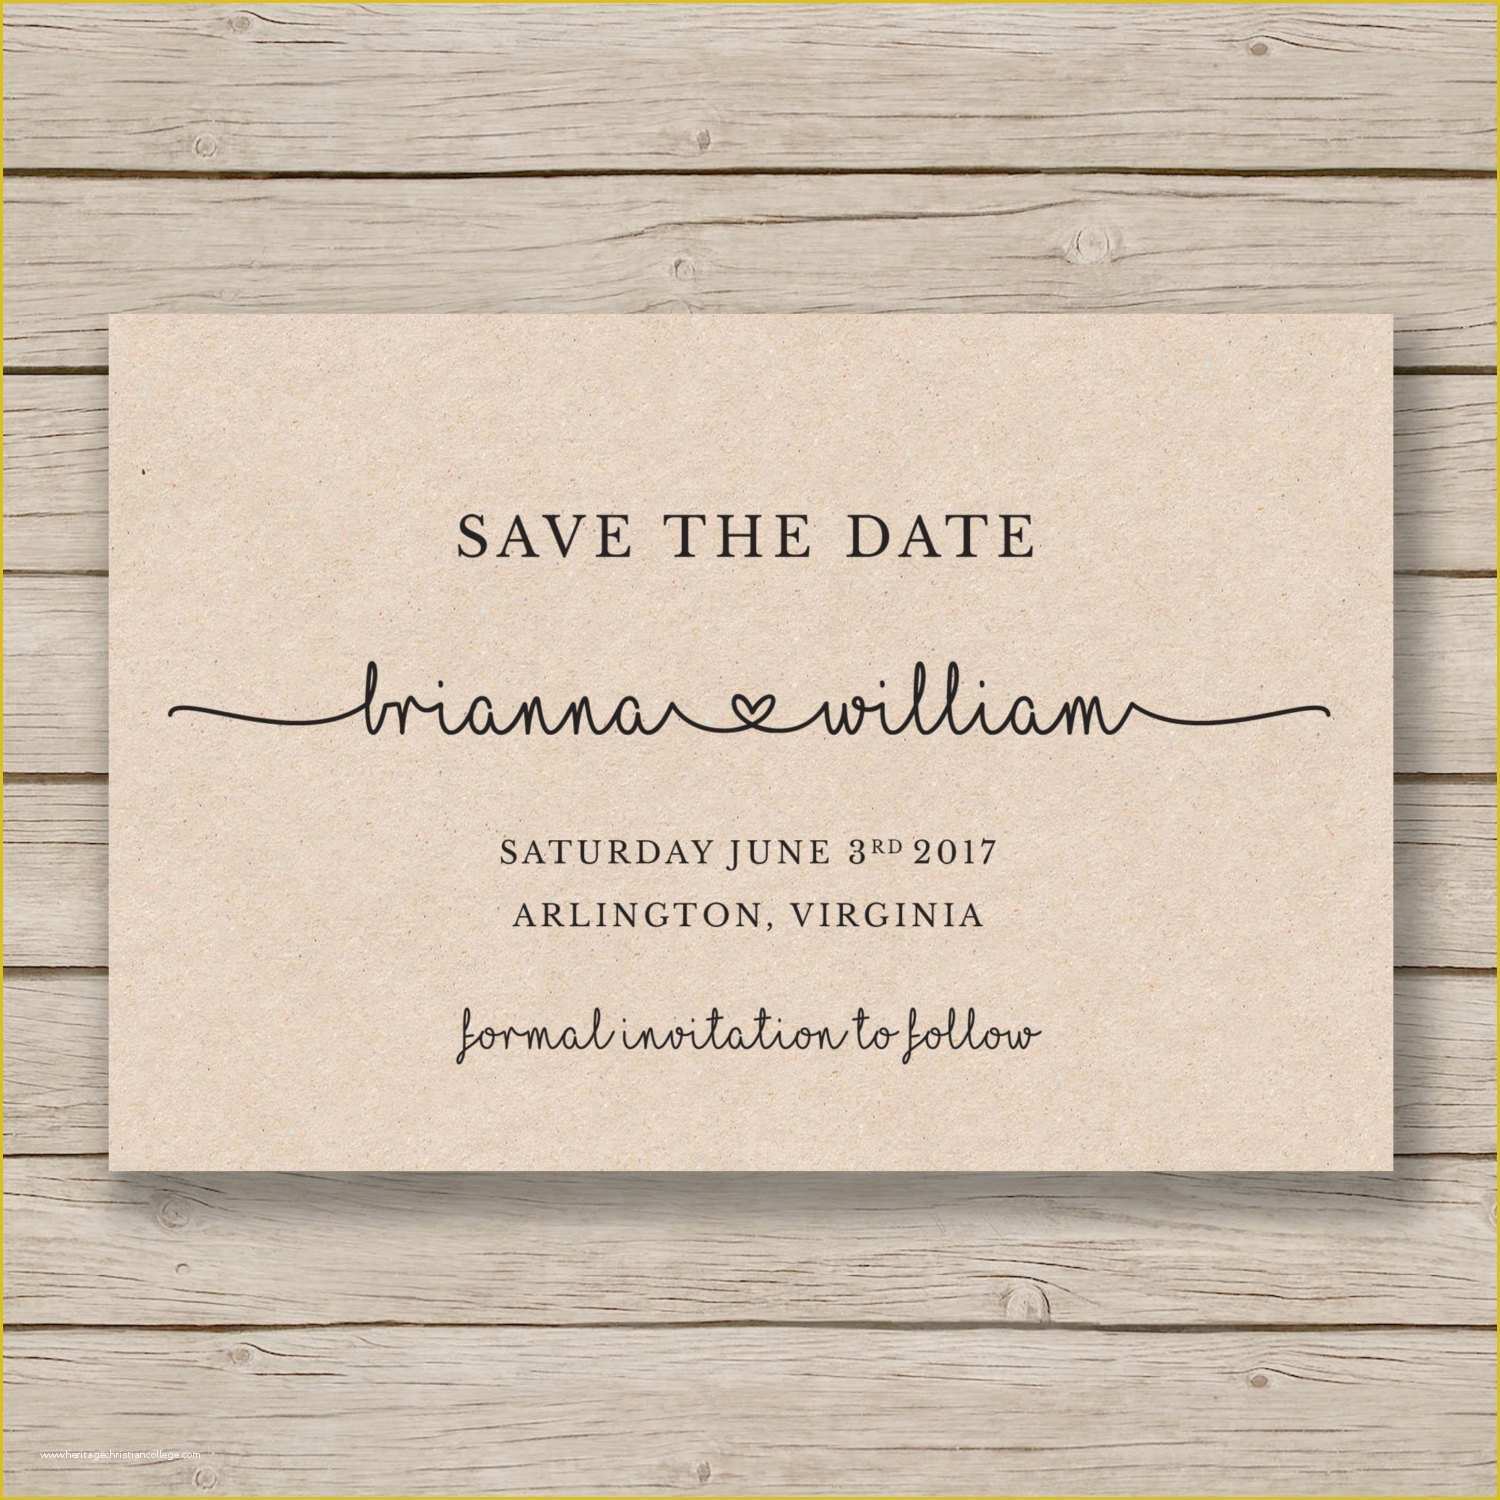 Free Save the Date Templates for Word Of Save the Date Printable Template Editable by You In Word